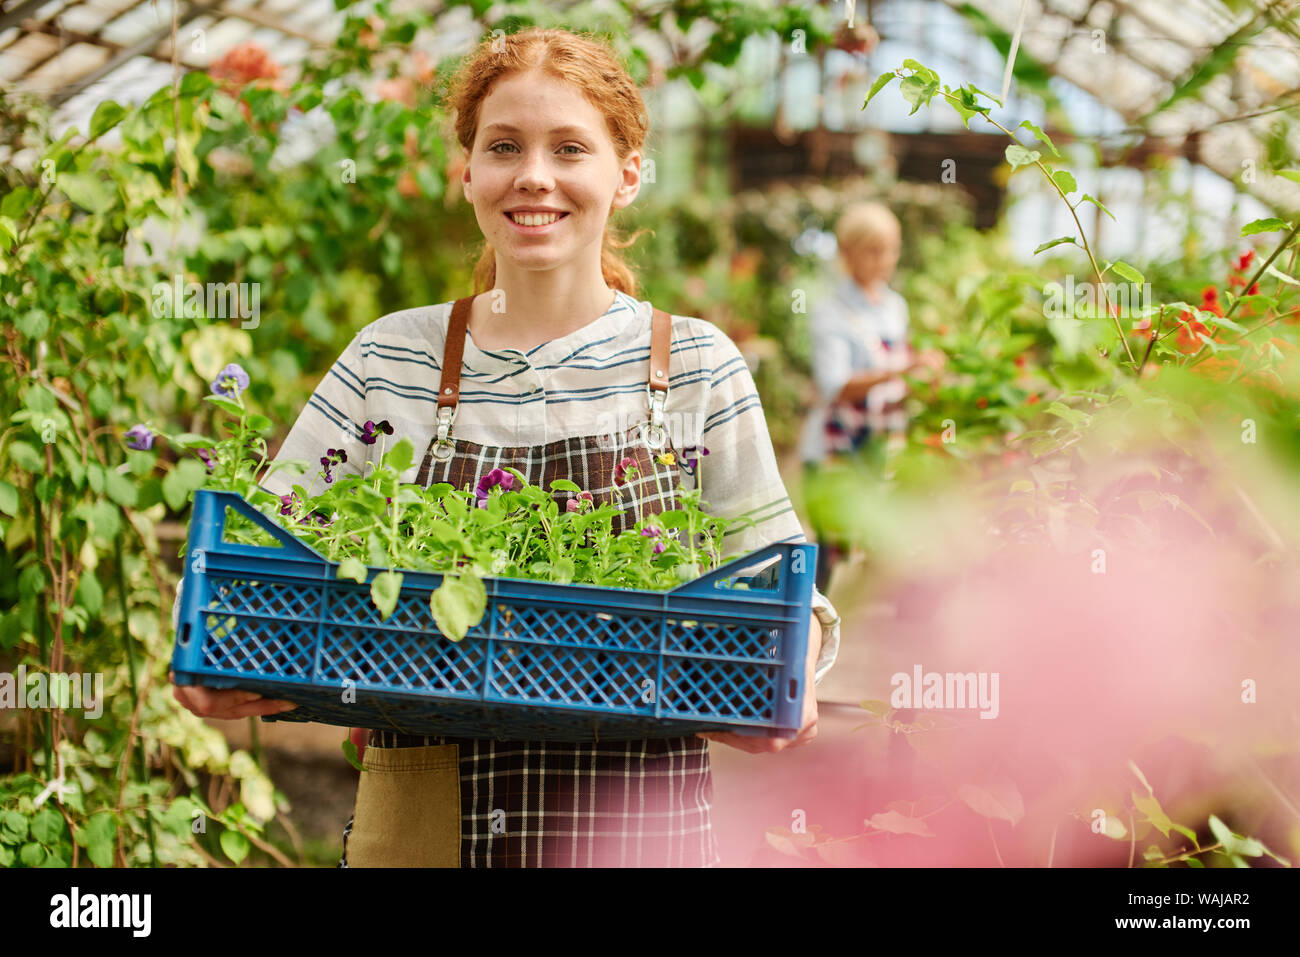 Gardener holds a crate fool of sprouts ready to go into the soil. Stock Photo